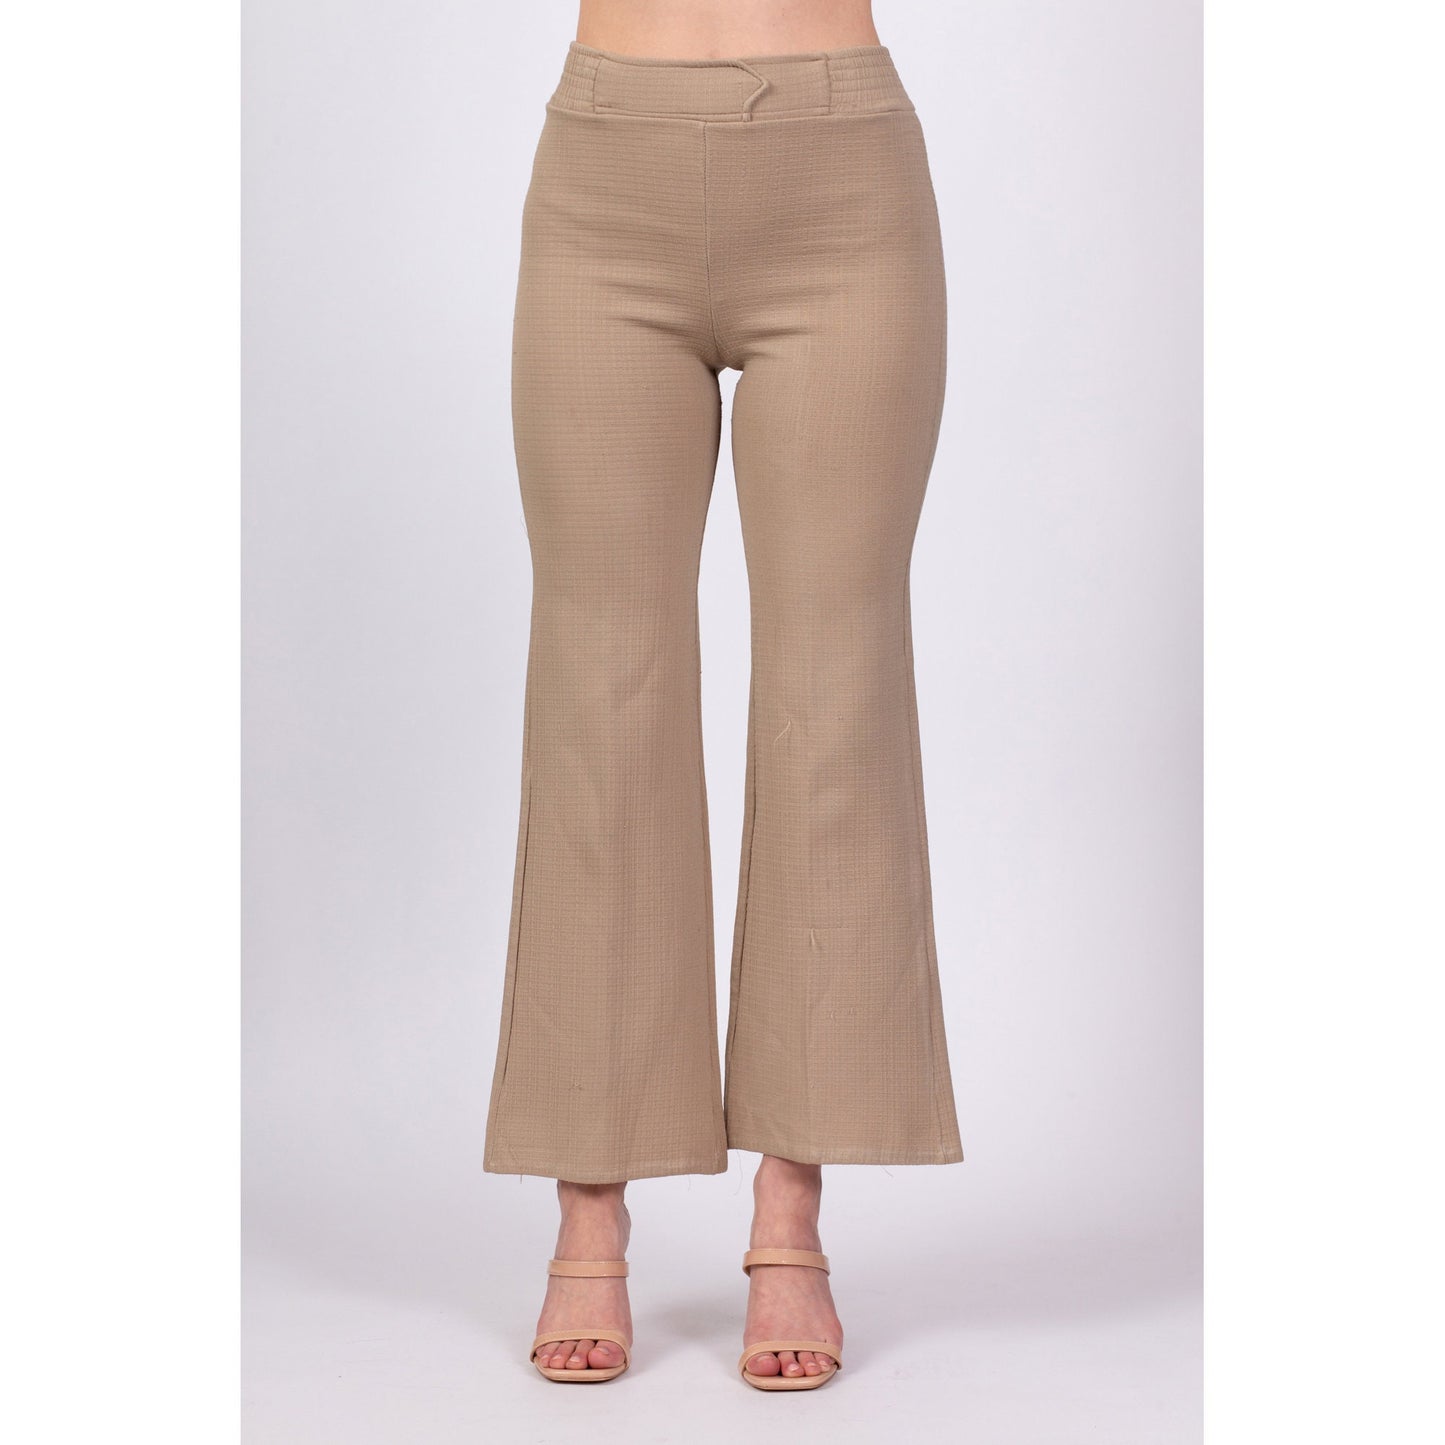 70s Taupe High Waisted Flared Pants - XS to Petite Small, 25"-27" 